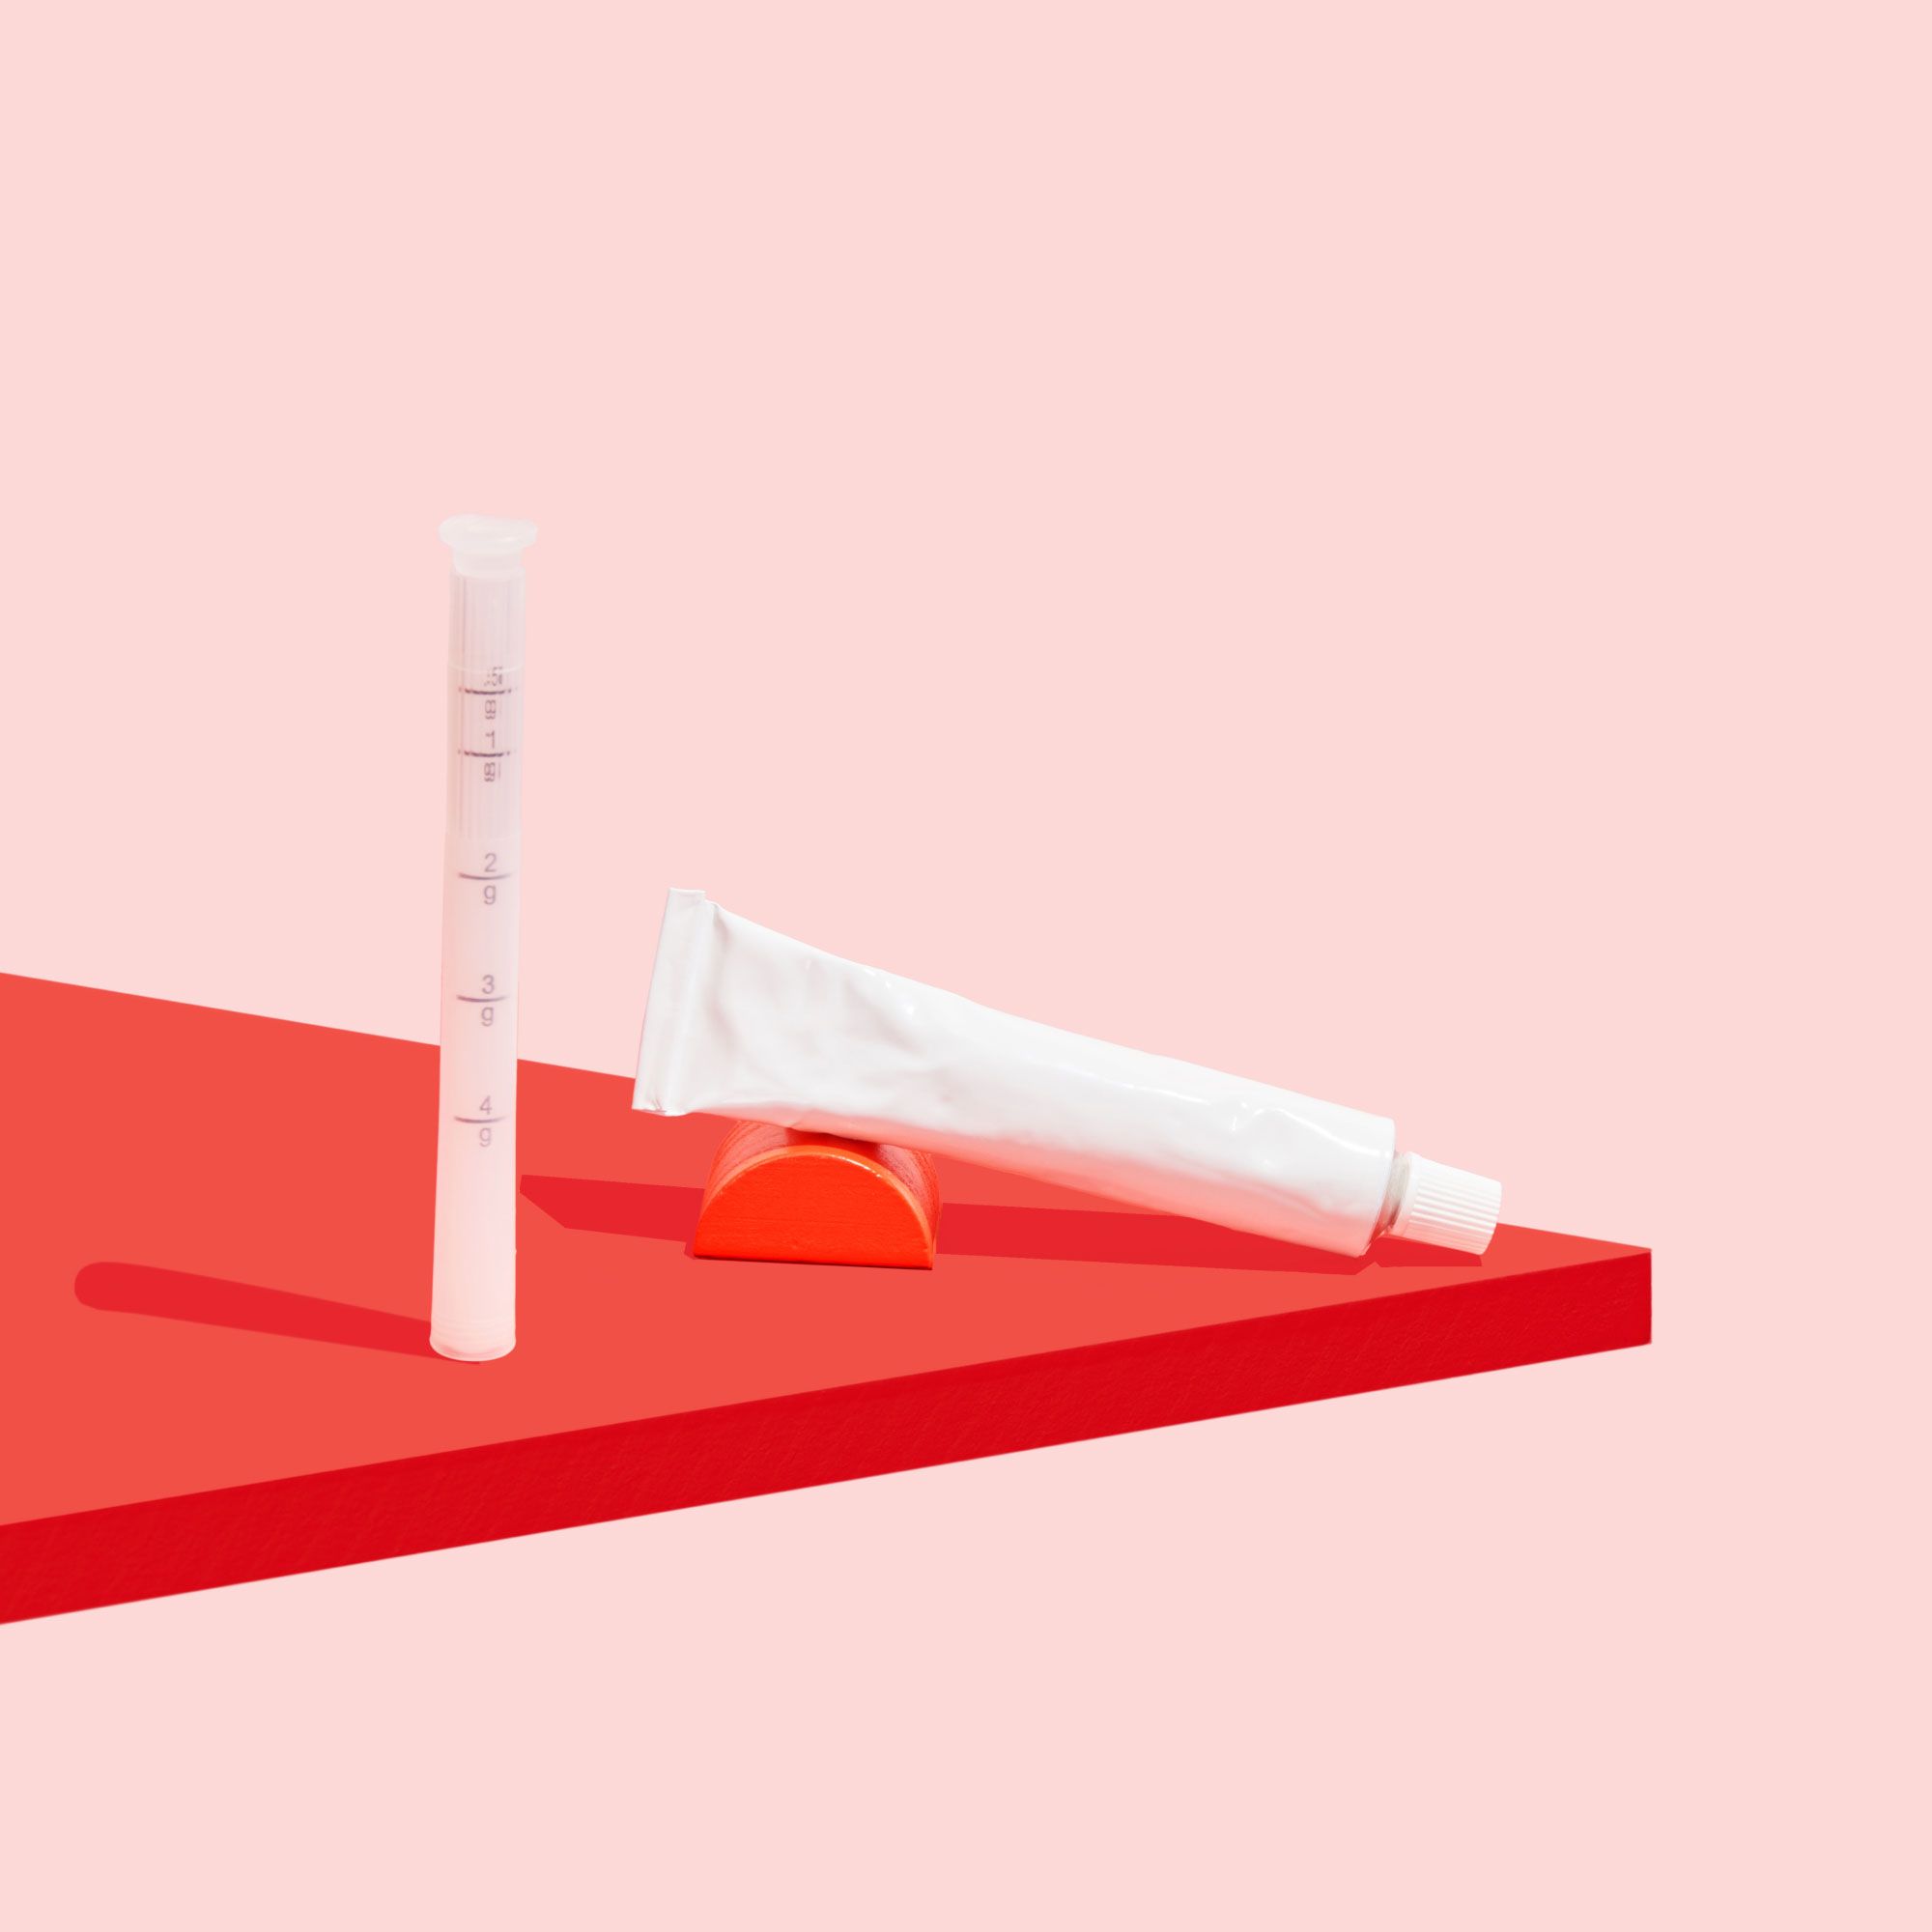 Tube of estradiol cream on a red surface with a pink background